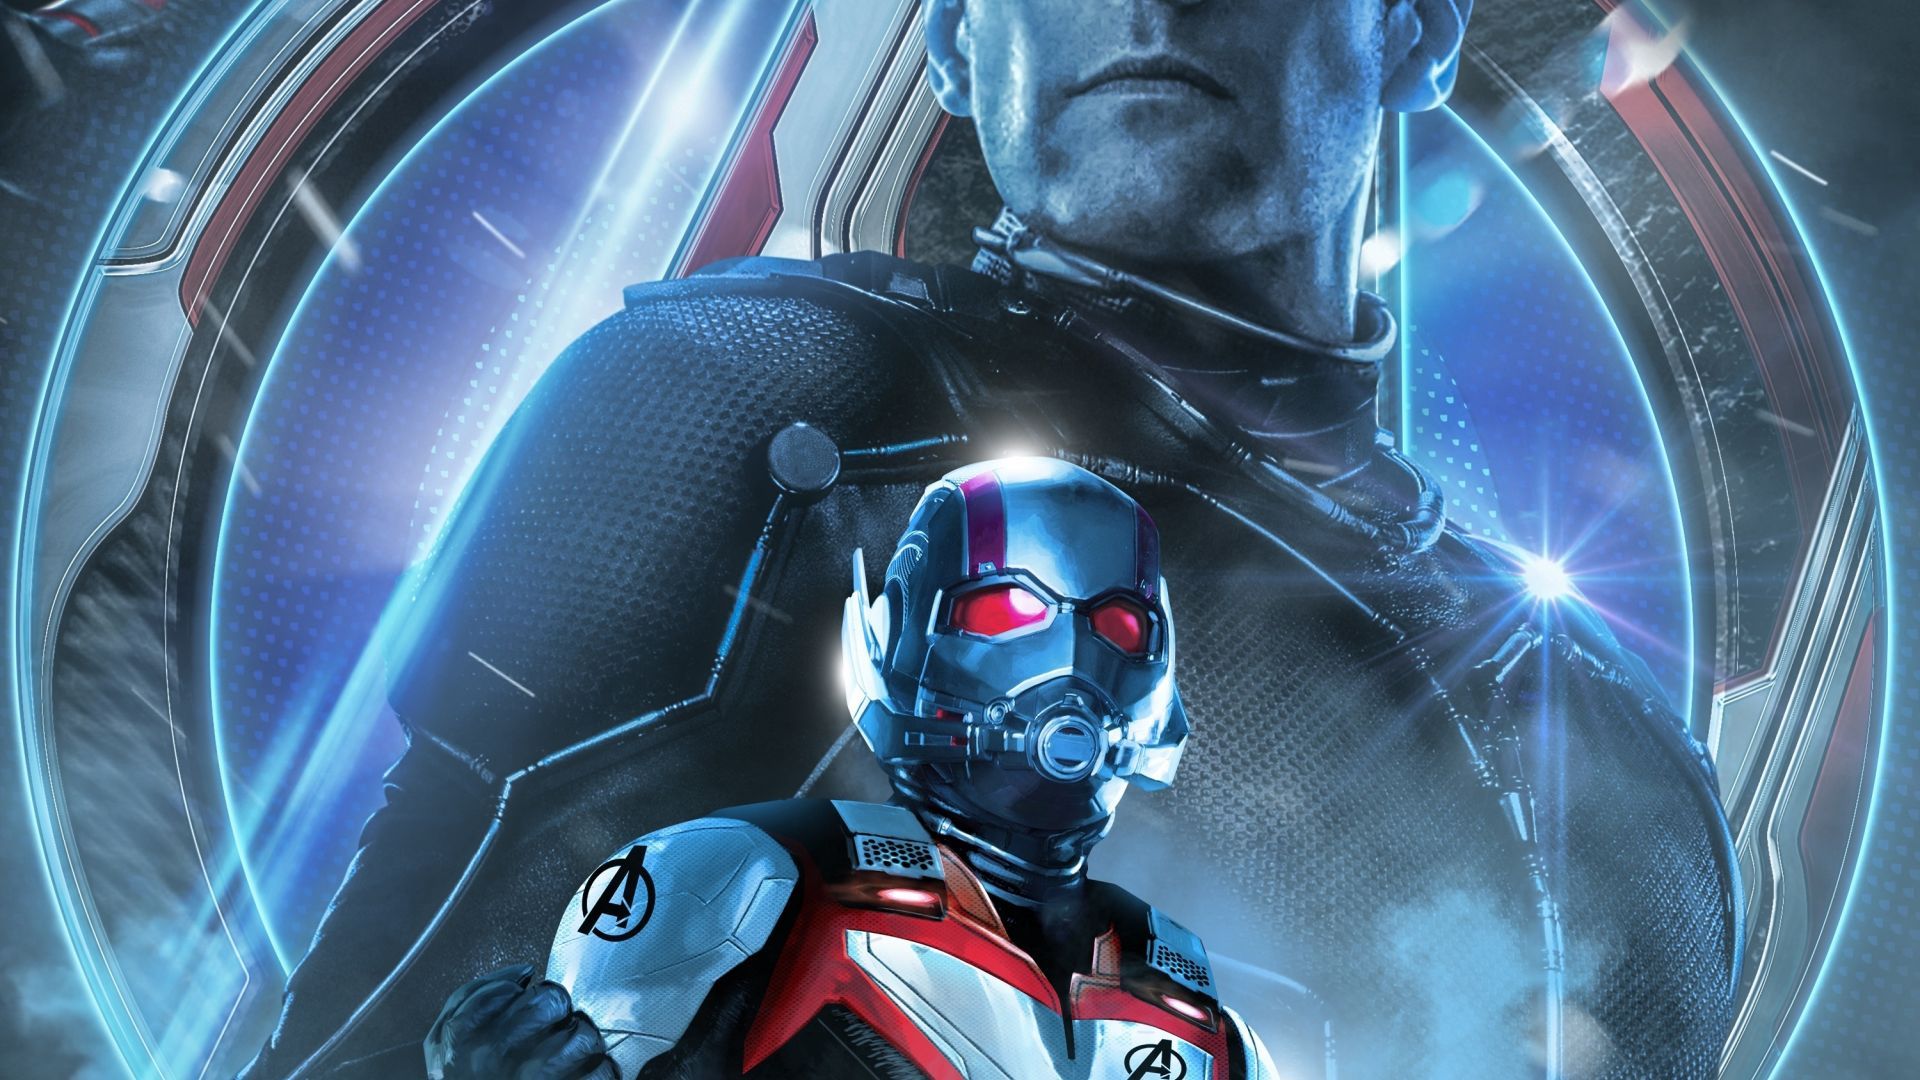 Avengers: Endgame, Ant Man, Movie Poster, Art Wallpaper, HD Image, Picture, Background, 19203f